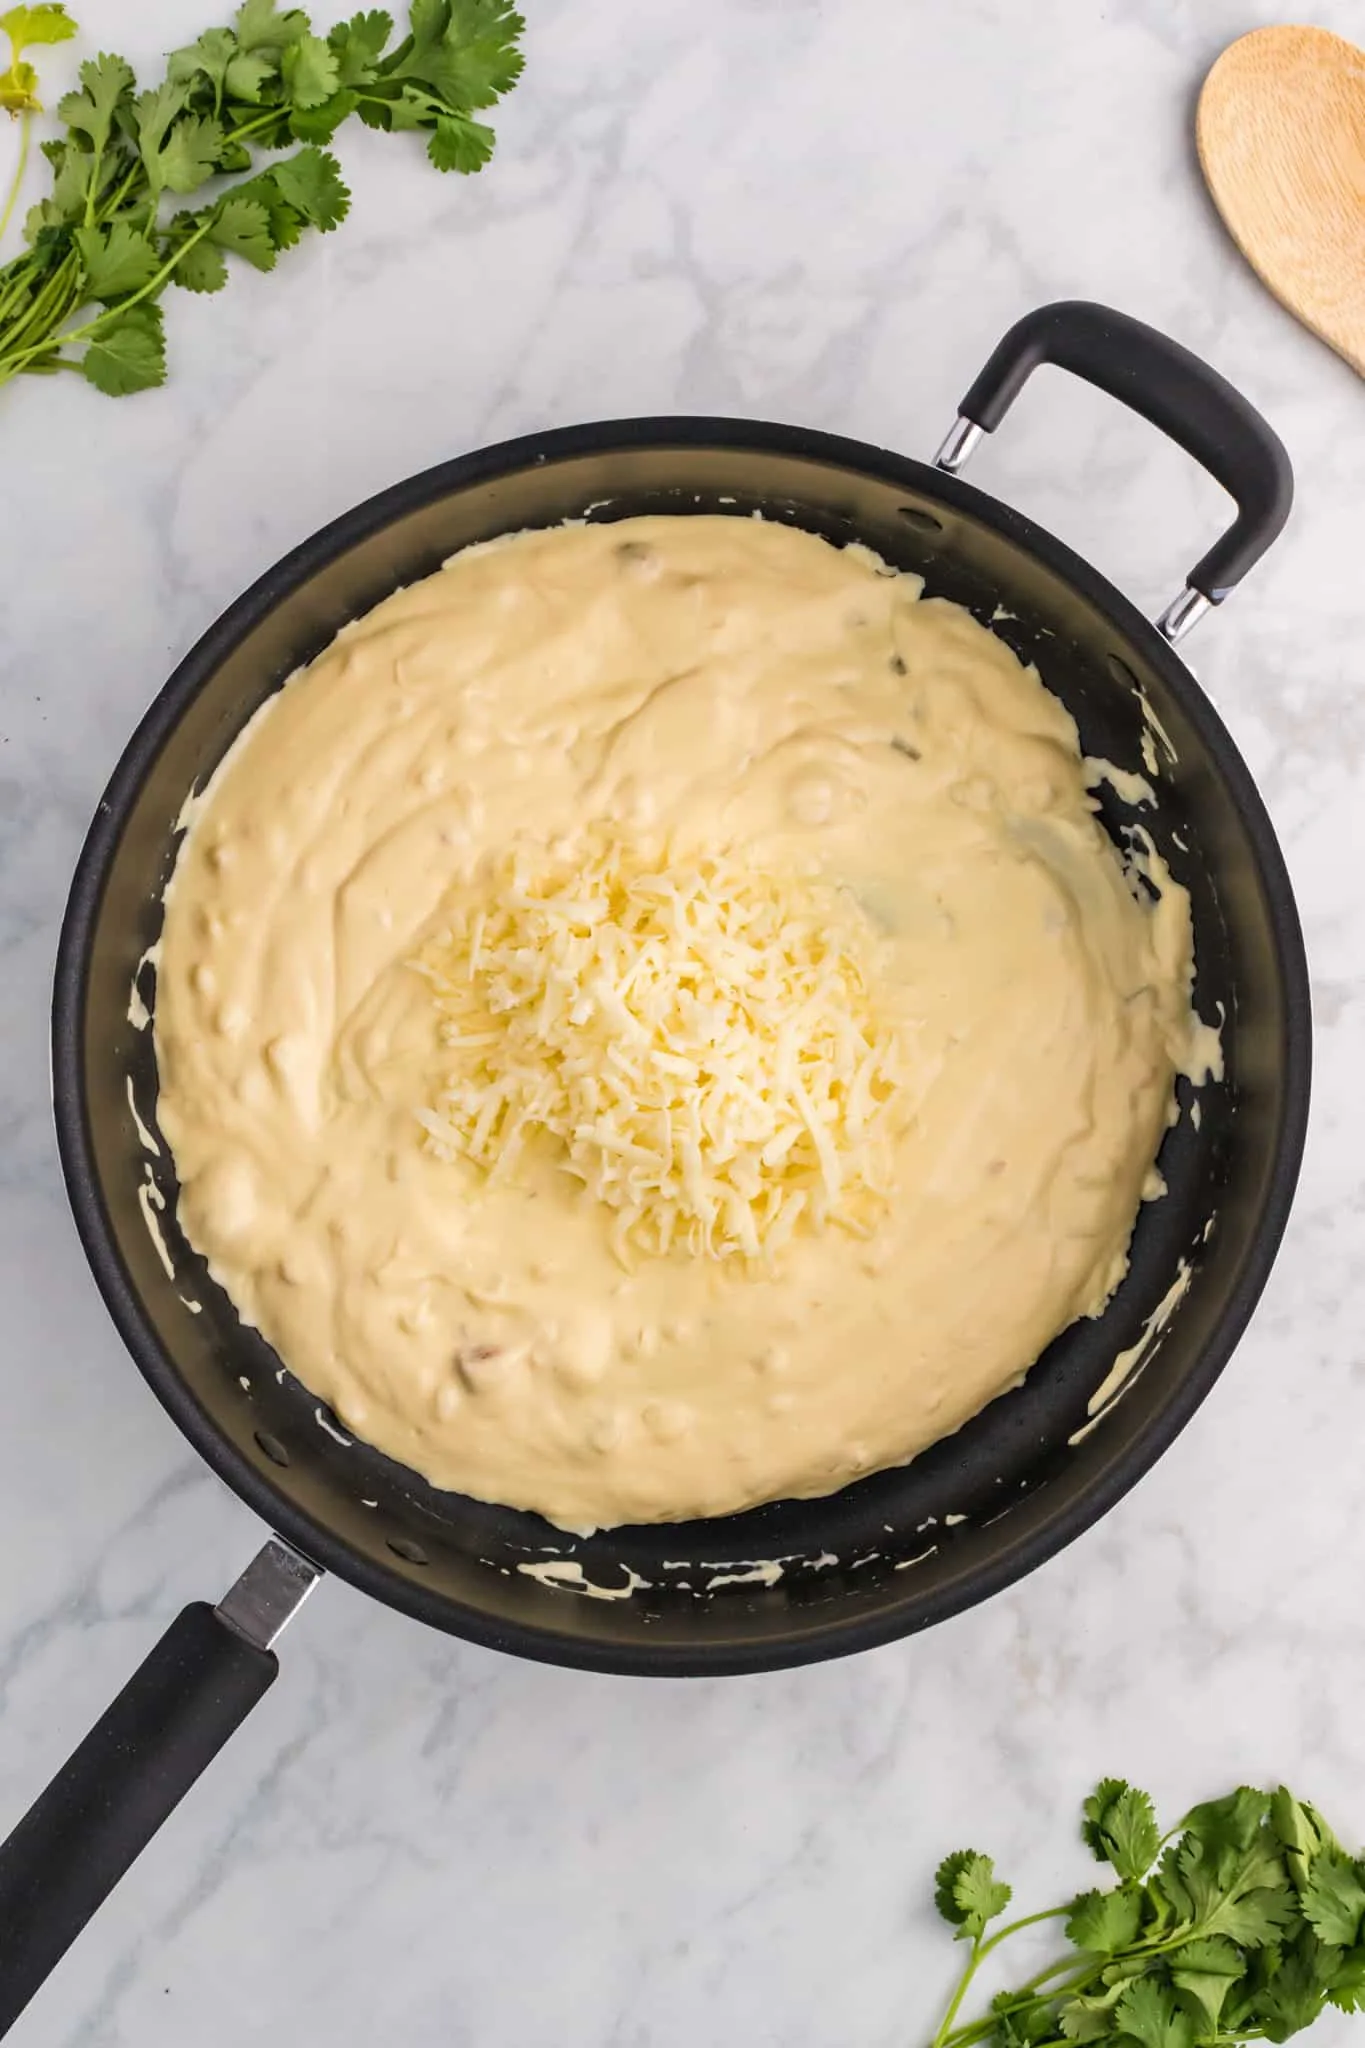 shredded Monterey jack cheese on top of cream of chicken soup and sour cream mixture in a pan